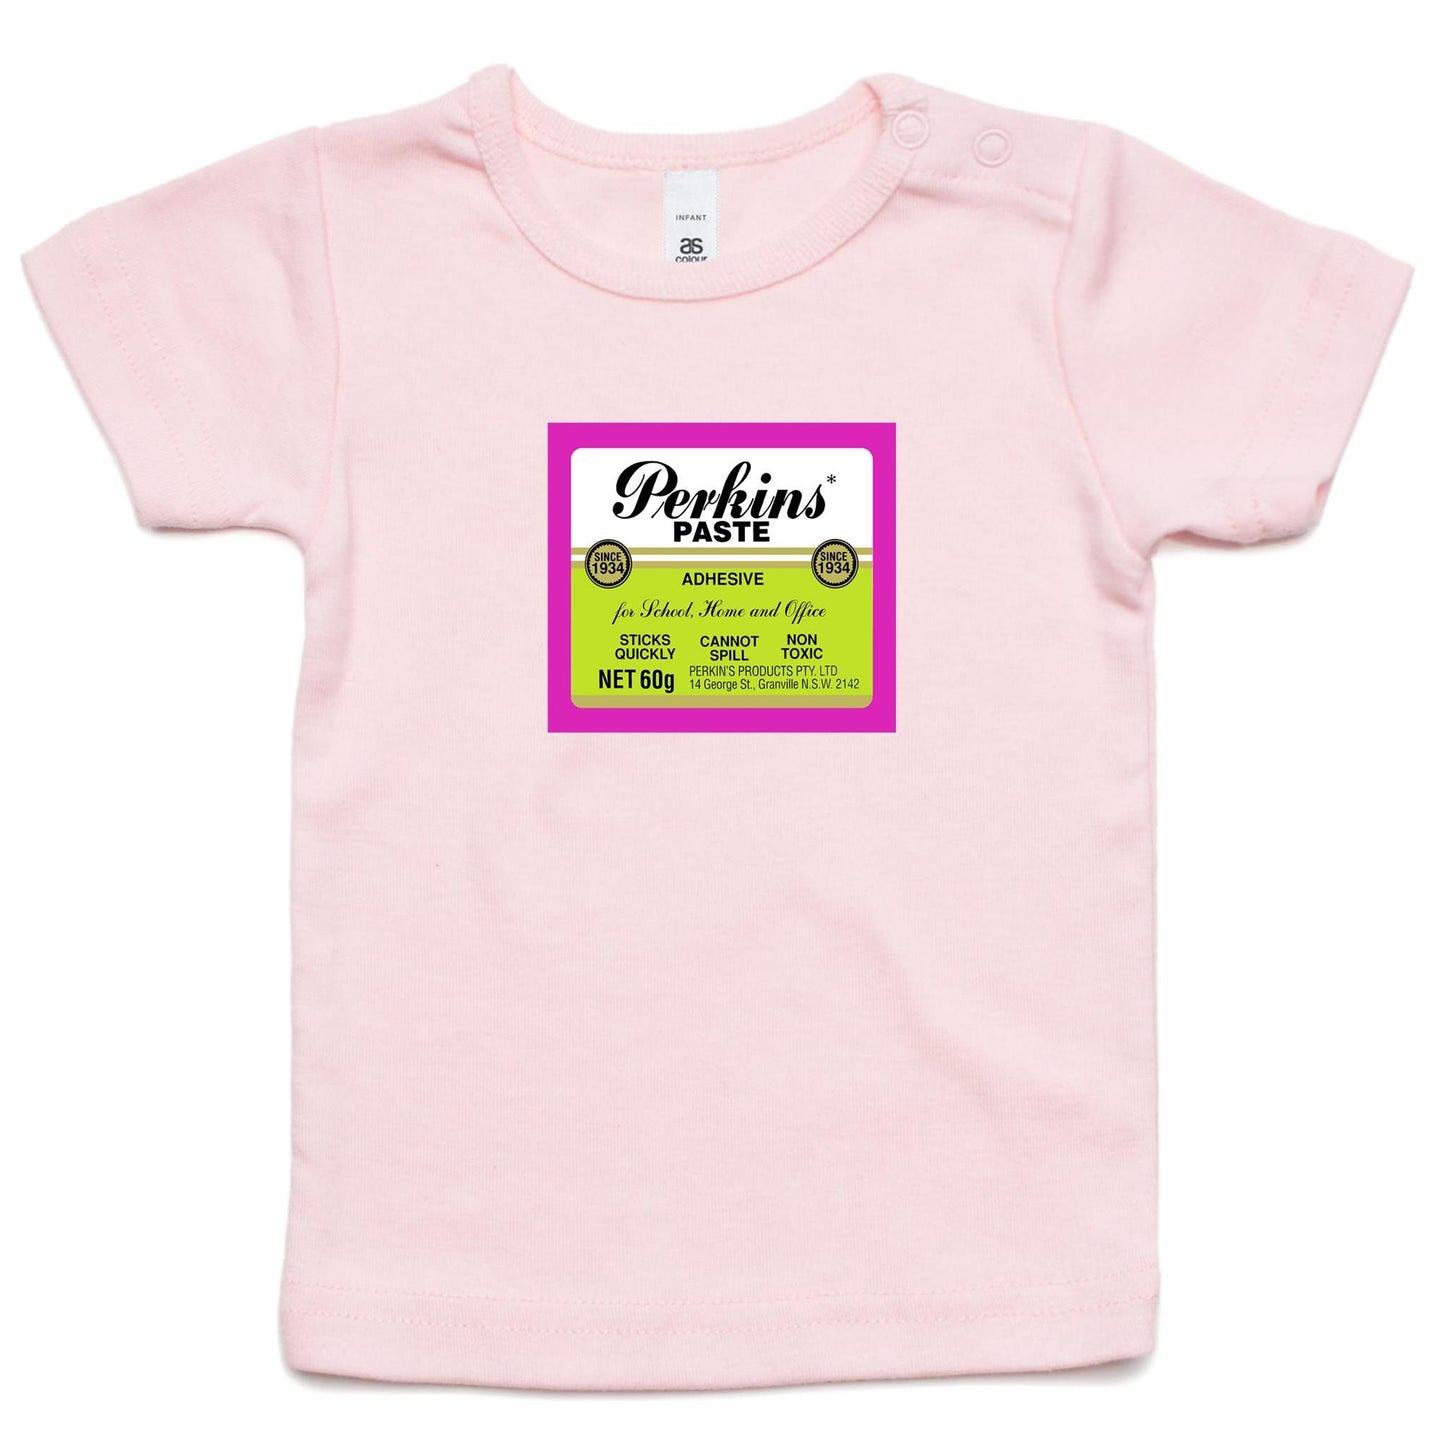 Perkins Paste T Shirts for Babies